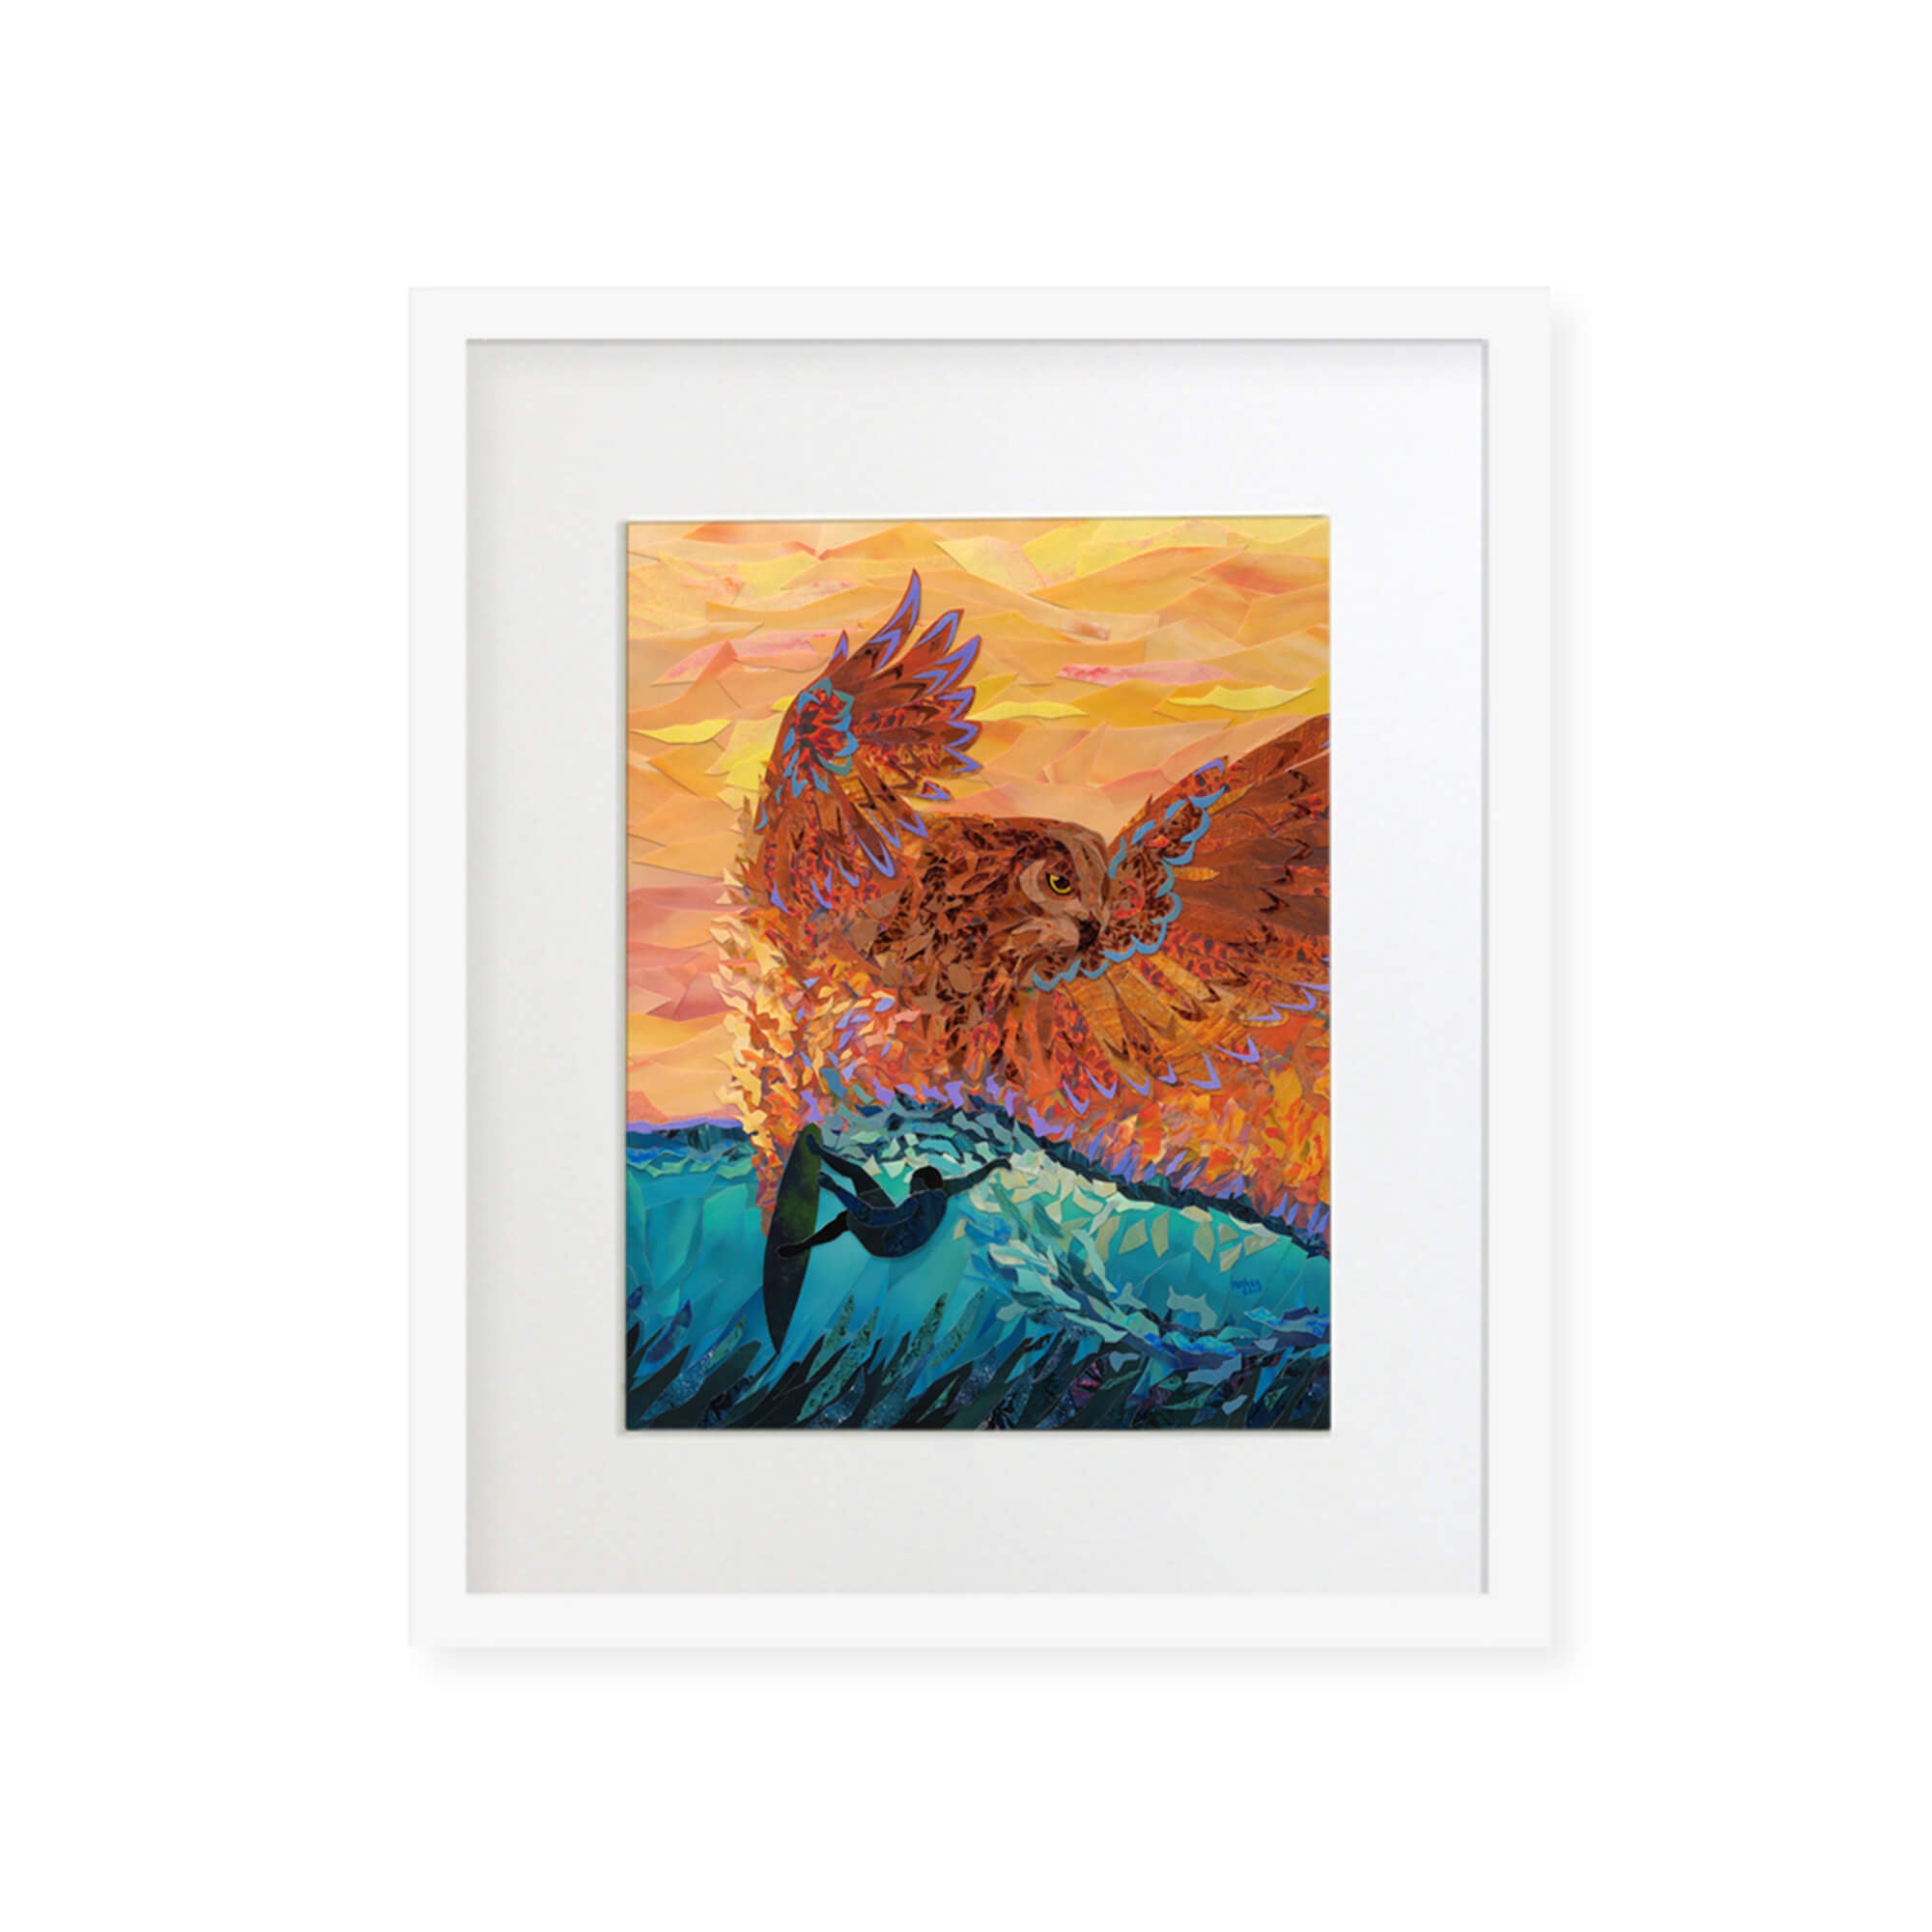 A framed matted art print featuring a collage of a surfer riding the epic wave of Hawaii and a vibrant orange-hued owl by Hawaii artist Patrick Parker